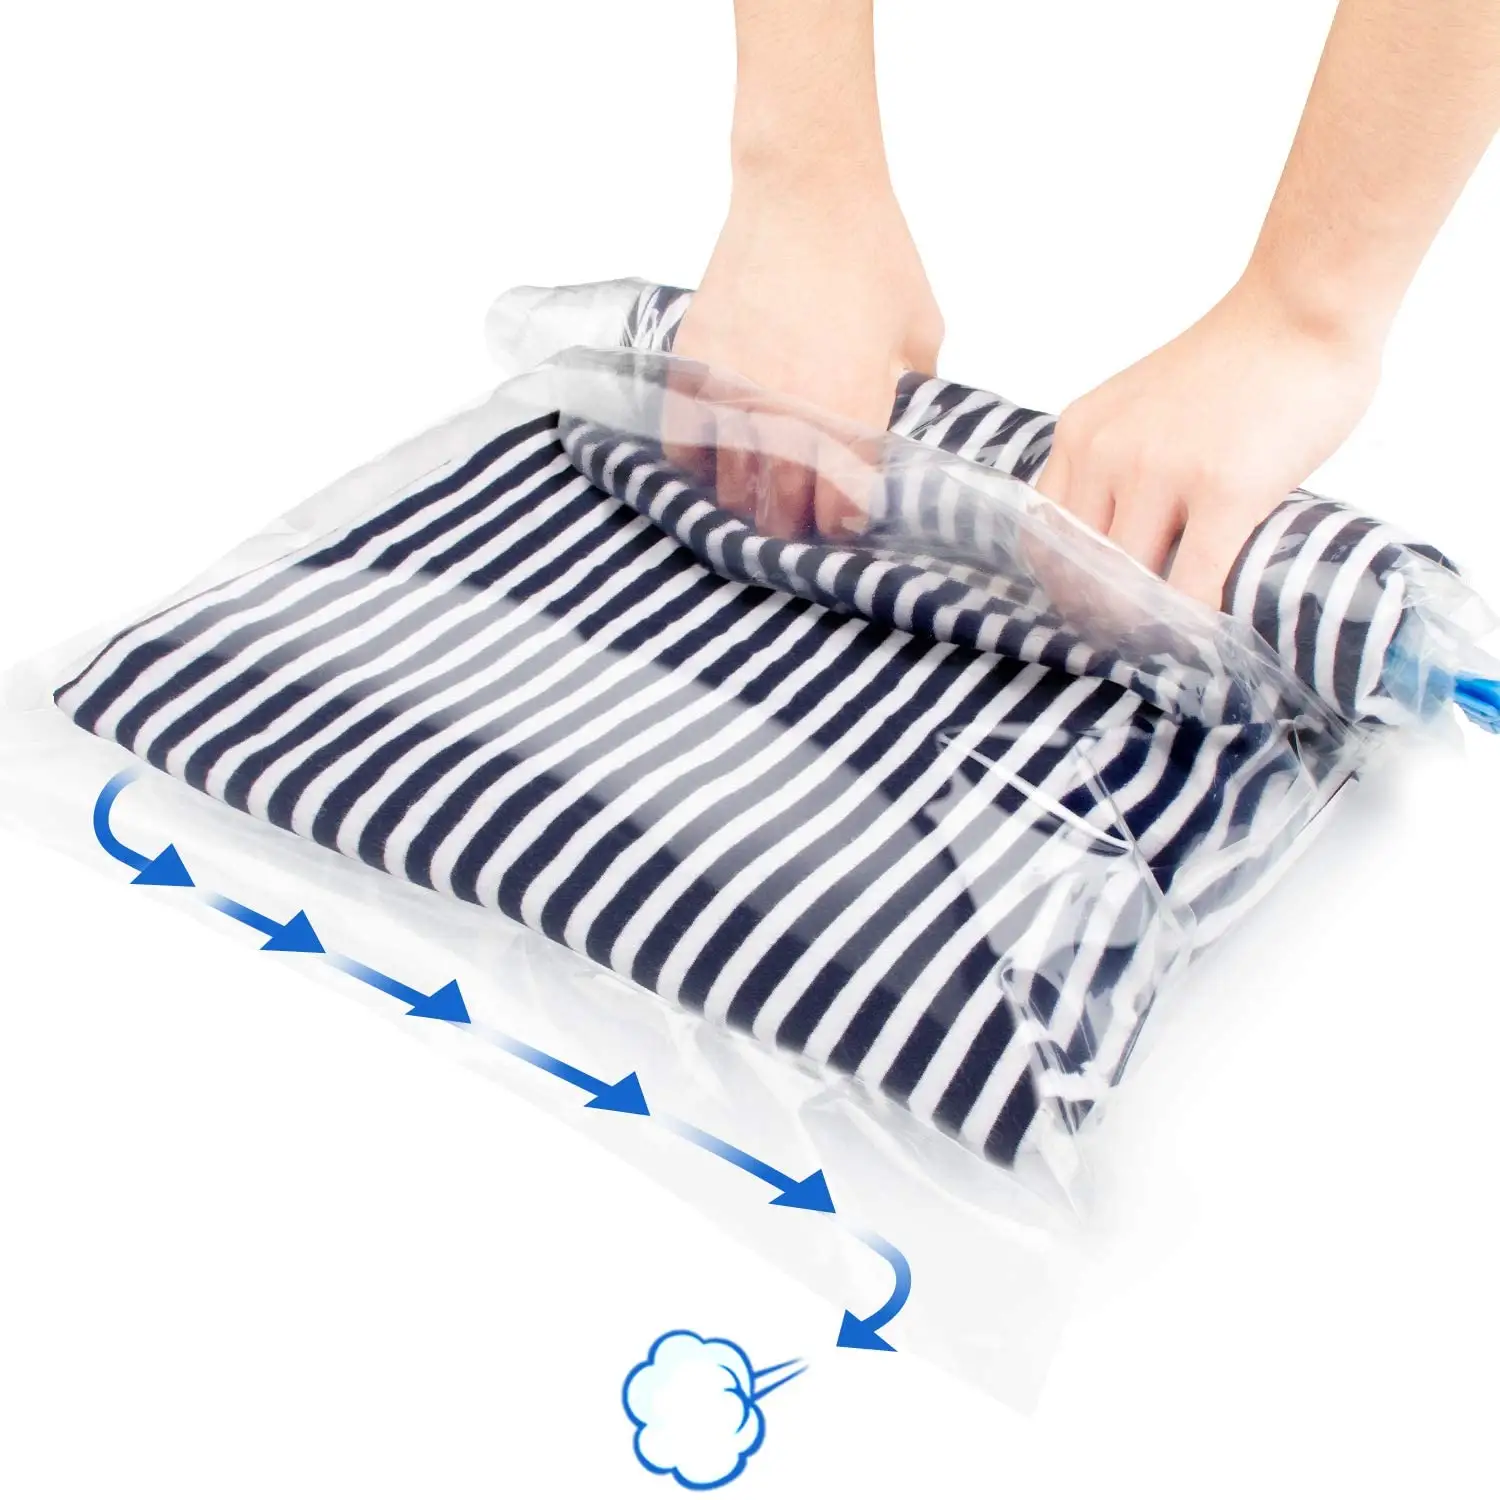 Vacuum Compressed Bags For Travel Travel Roll Up Compression Storage Bags For Suitcases - No Vacuum Needed